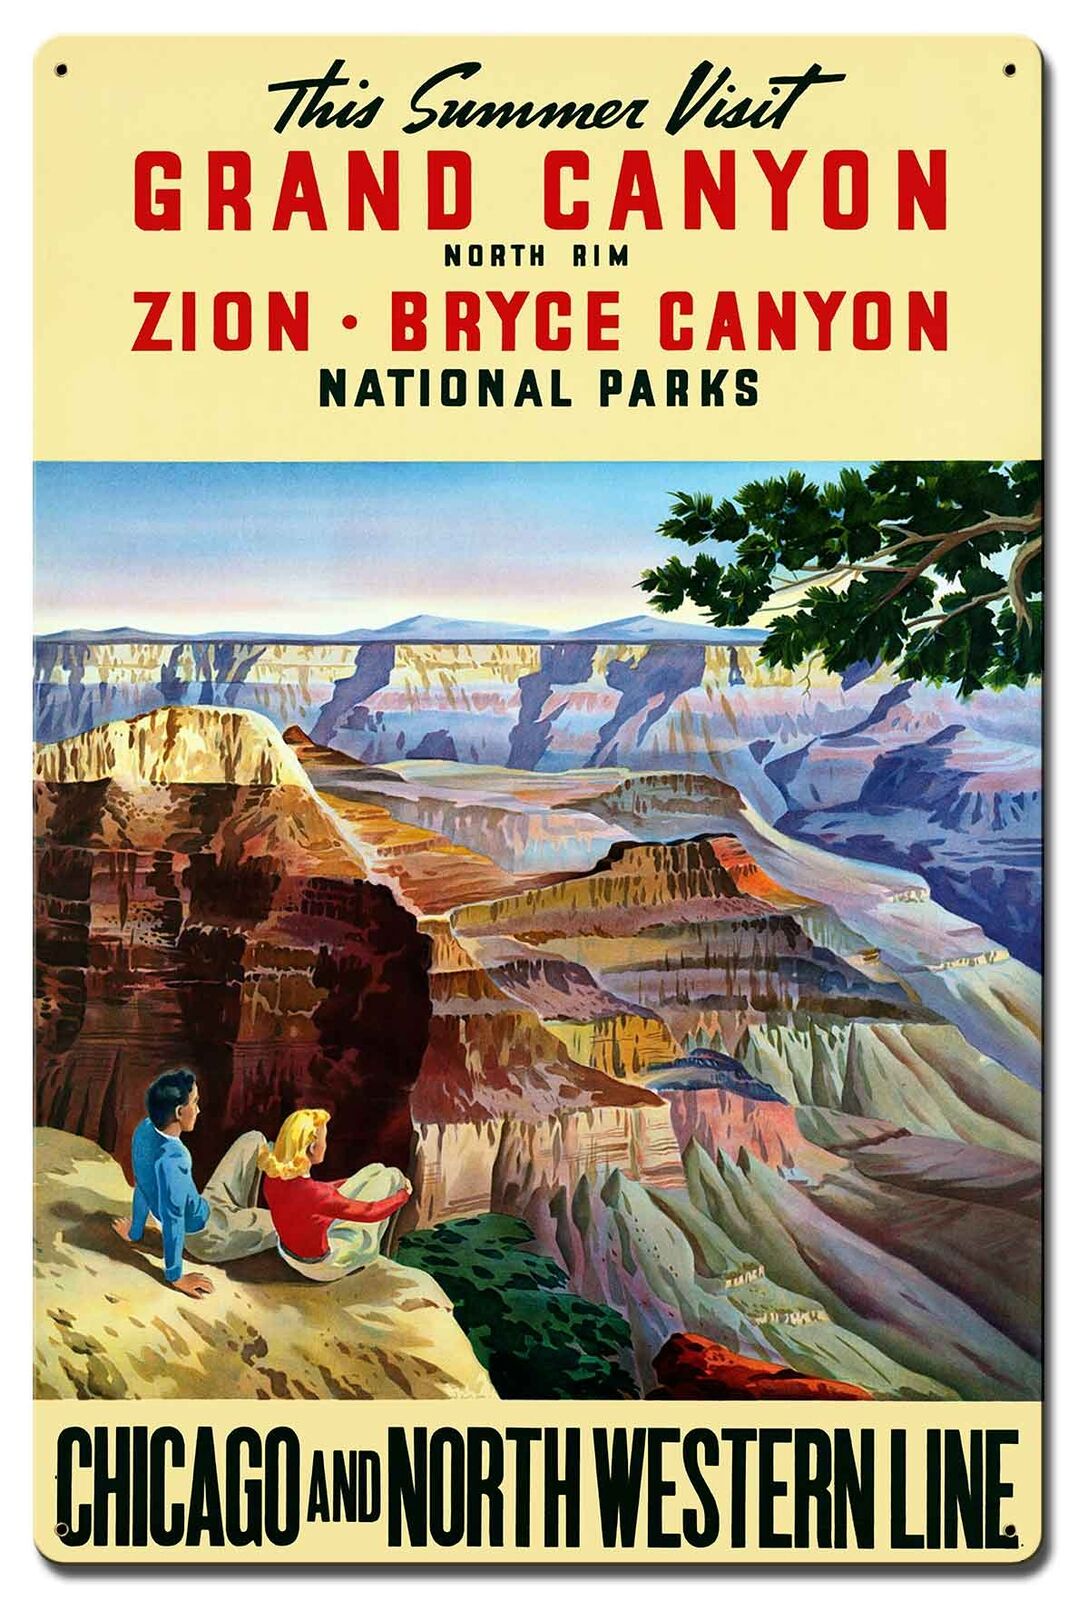 VINTAGE STYLE METAL SIGN Visit Grand Canyon Zion Bryce  16 X 24